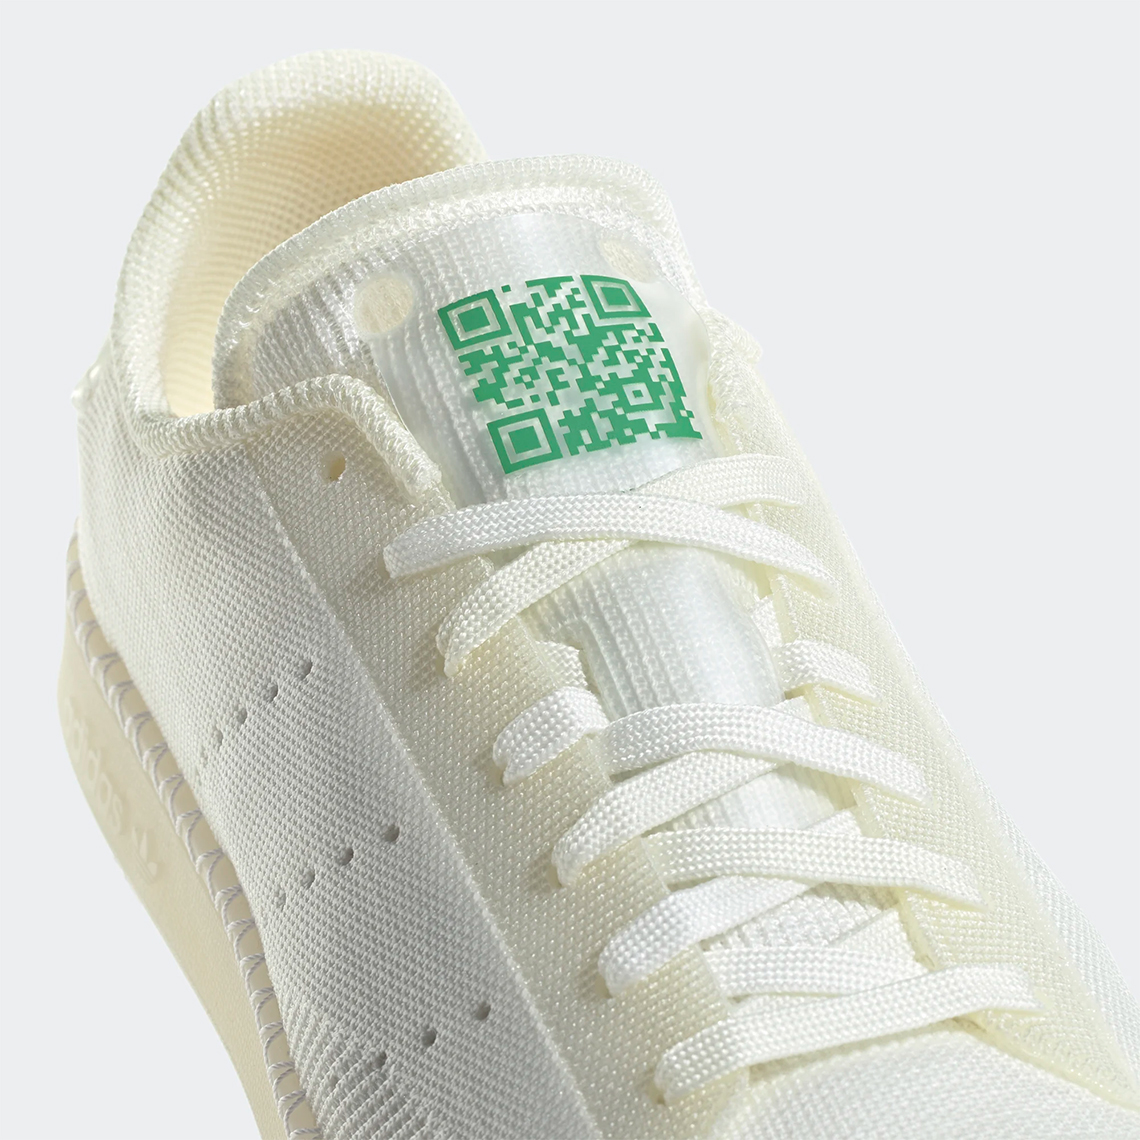 Adidas Stan Smith Made To Be Remade